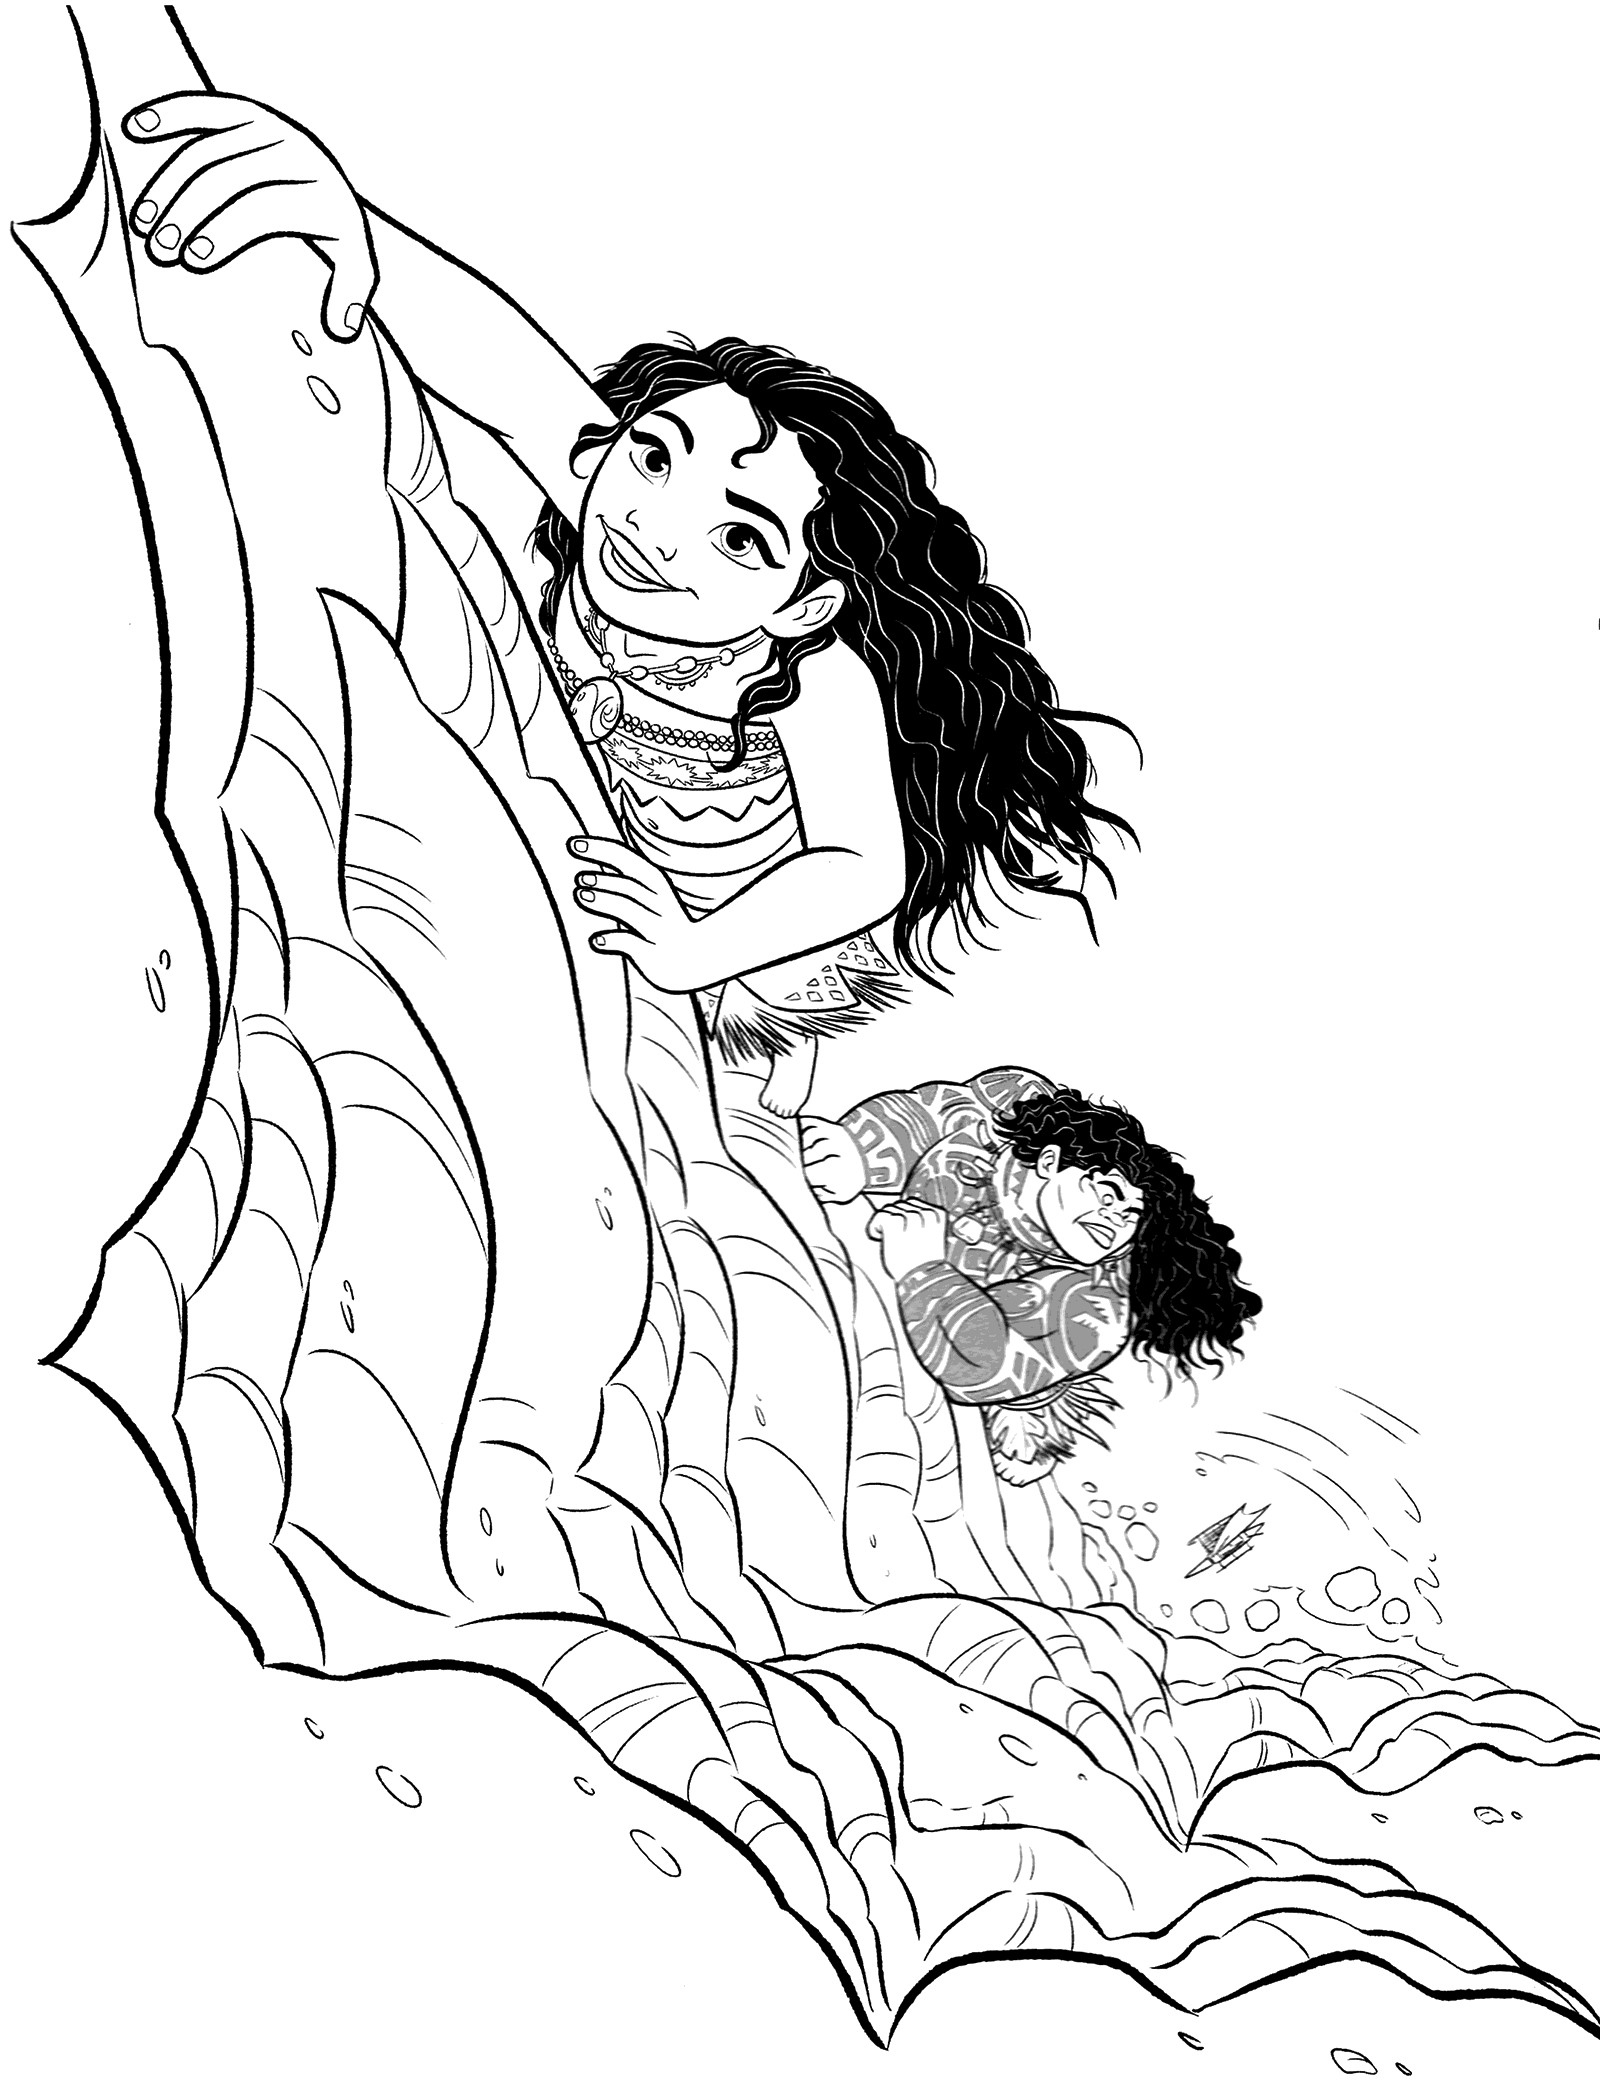 Moana Coloring Pages For Toddlers
 Moana Coloring Pages Best Coloring Pages For Kids